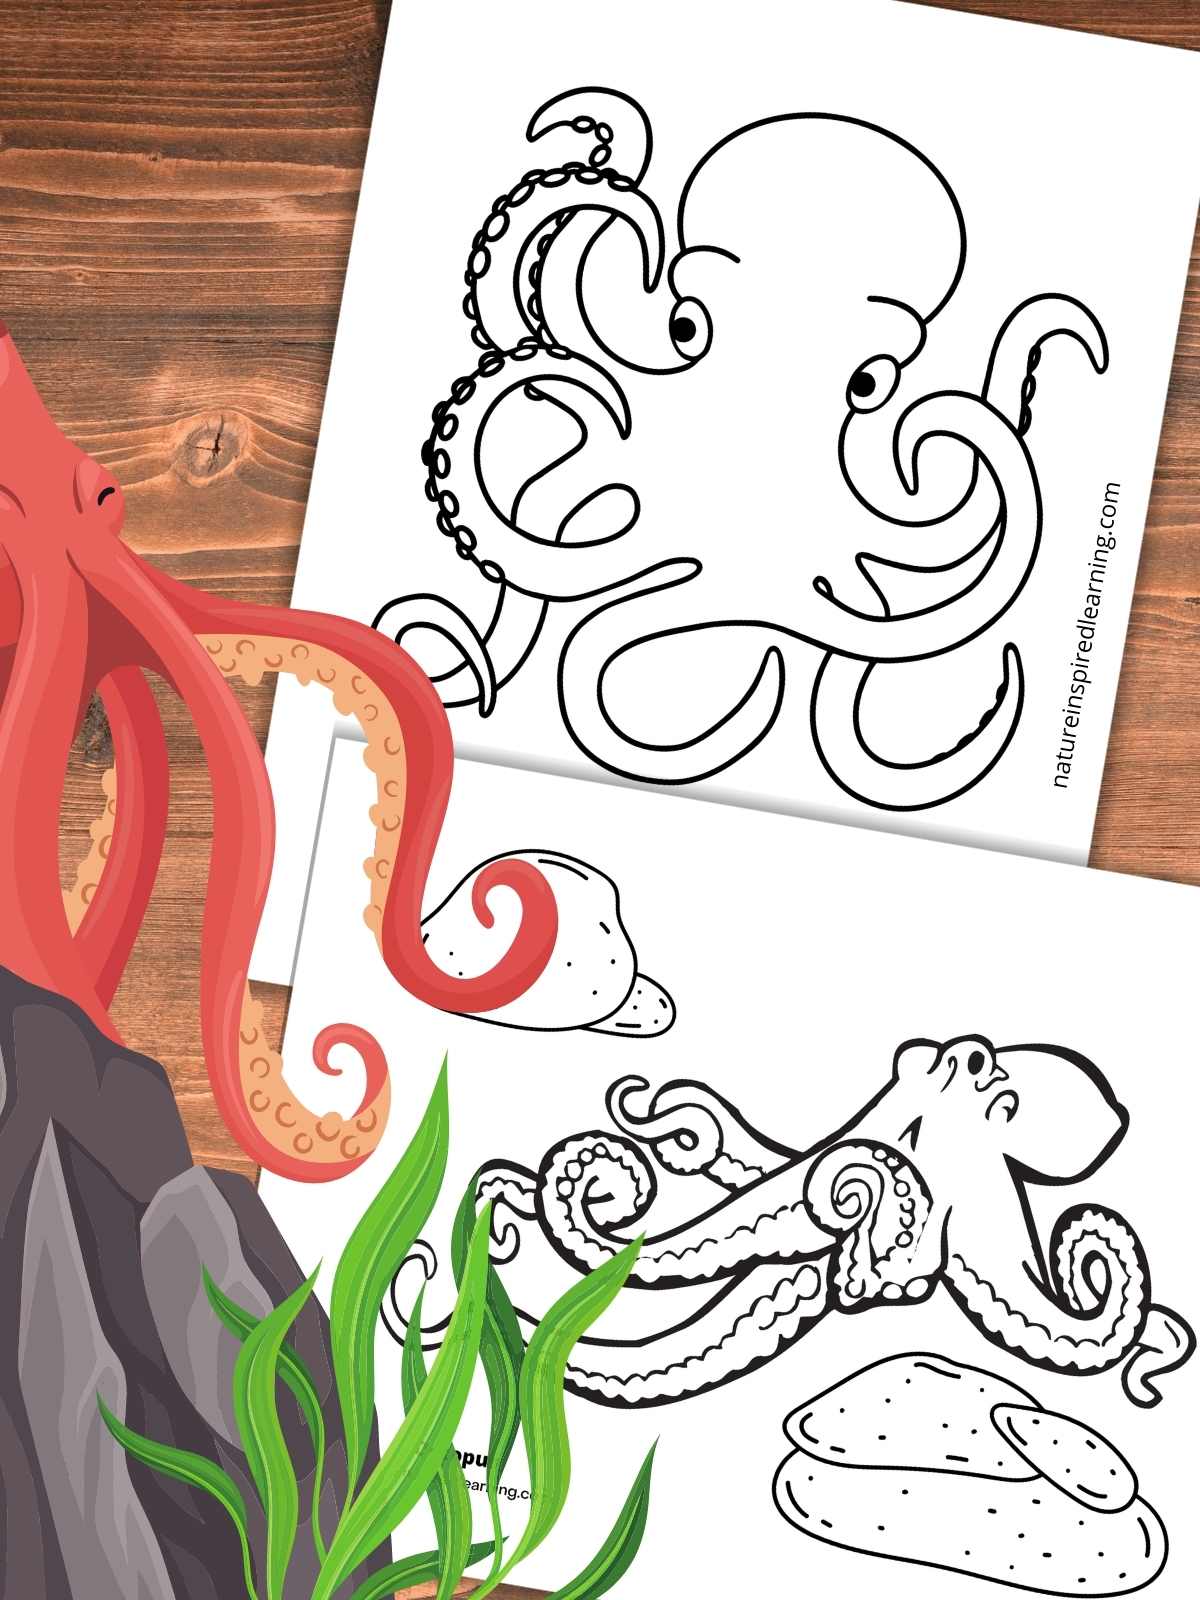 two coloring pages with black and white images of octopus overlapping on a wooden background. Red octopus left side above a grey rock and green kelp